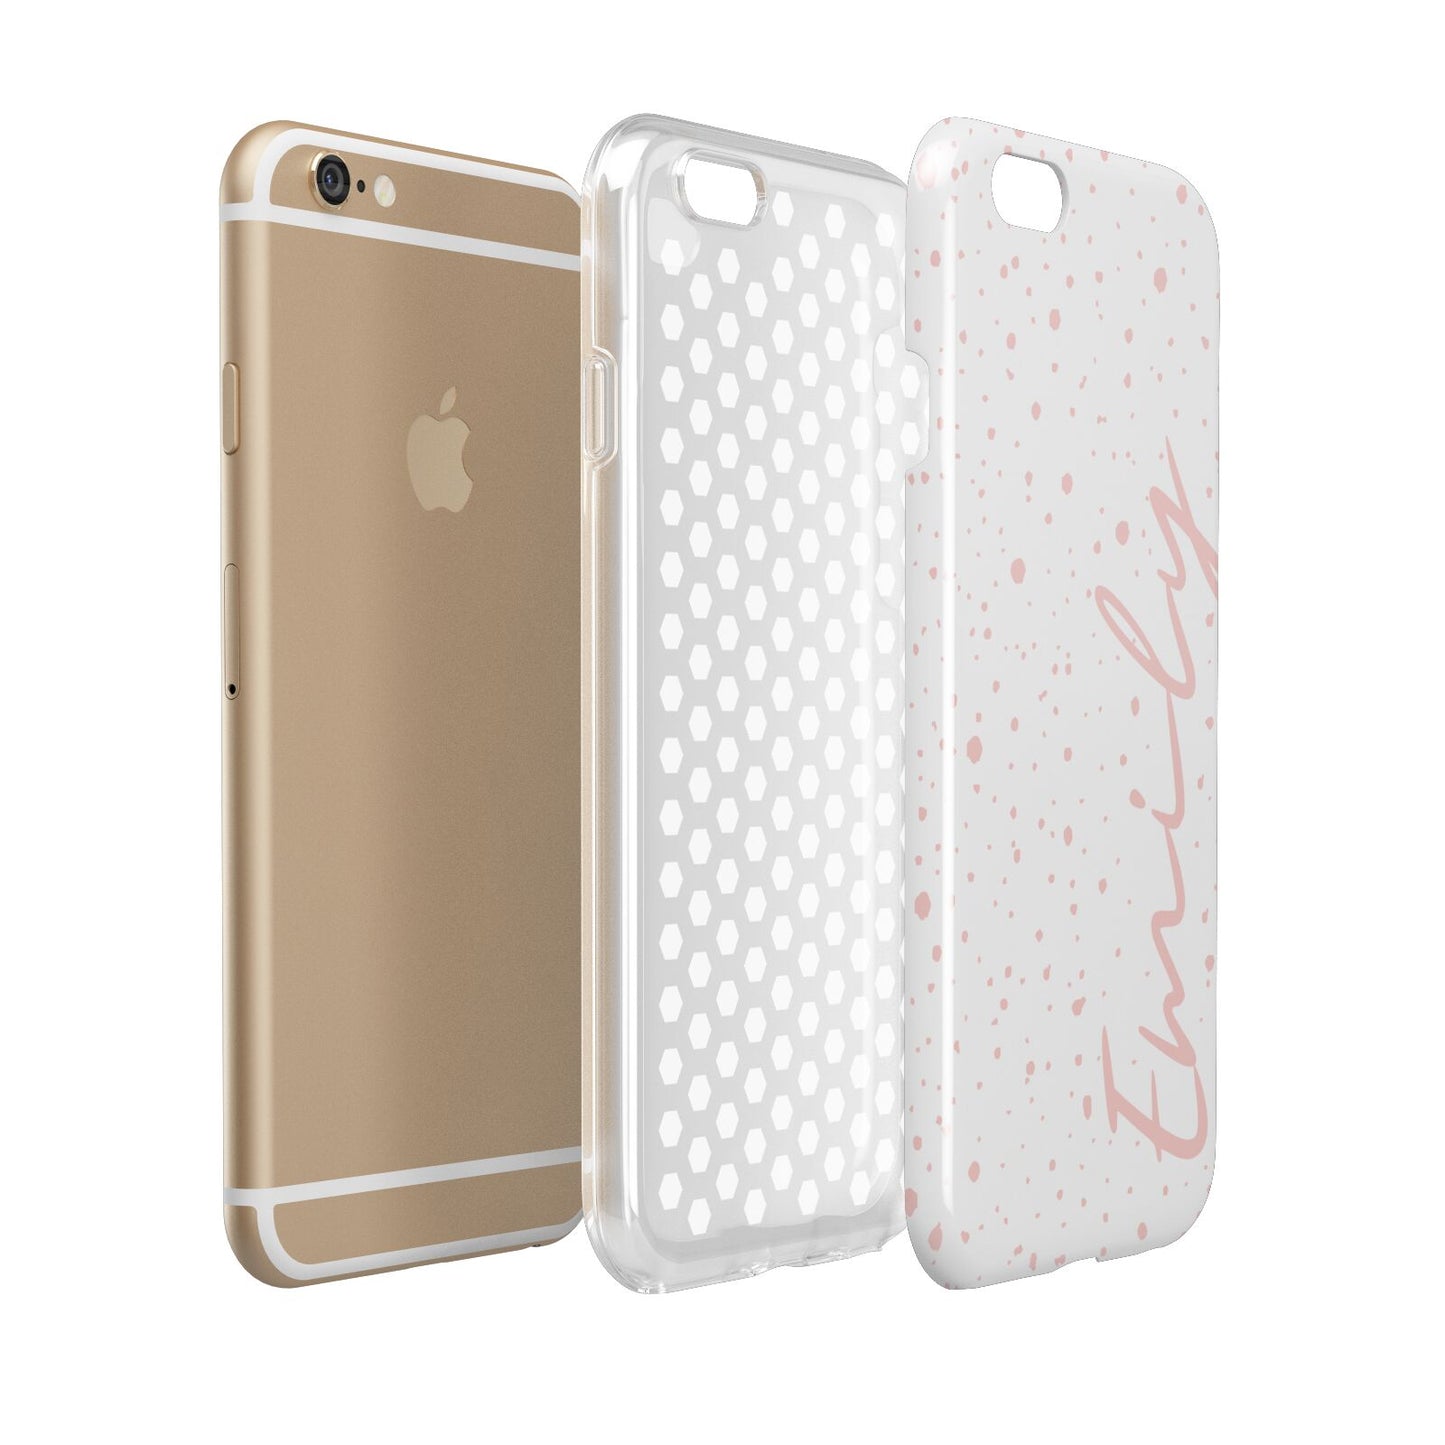 Custom Polka Dot Apple iPhone 6 3D Tough Case Expanded view